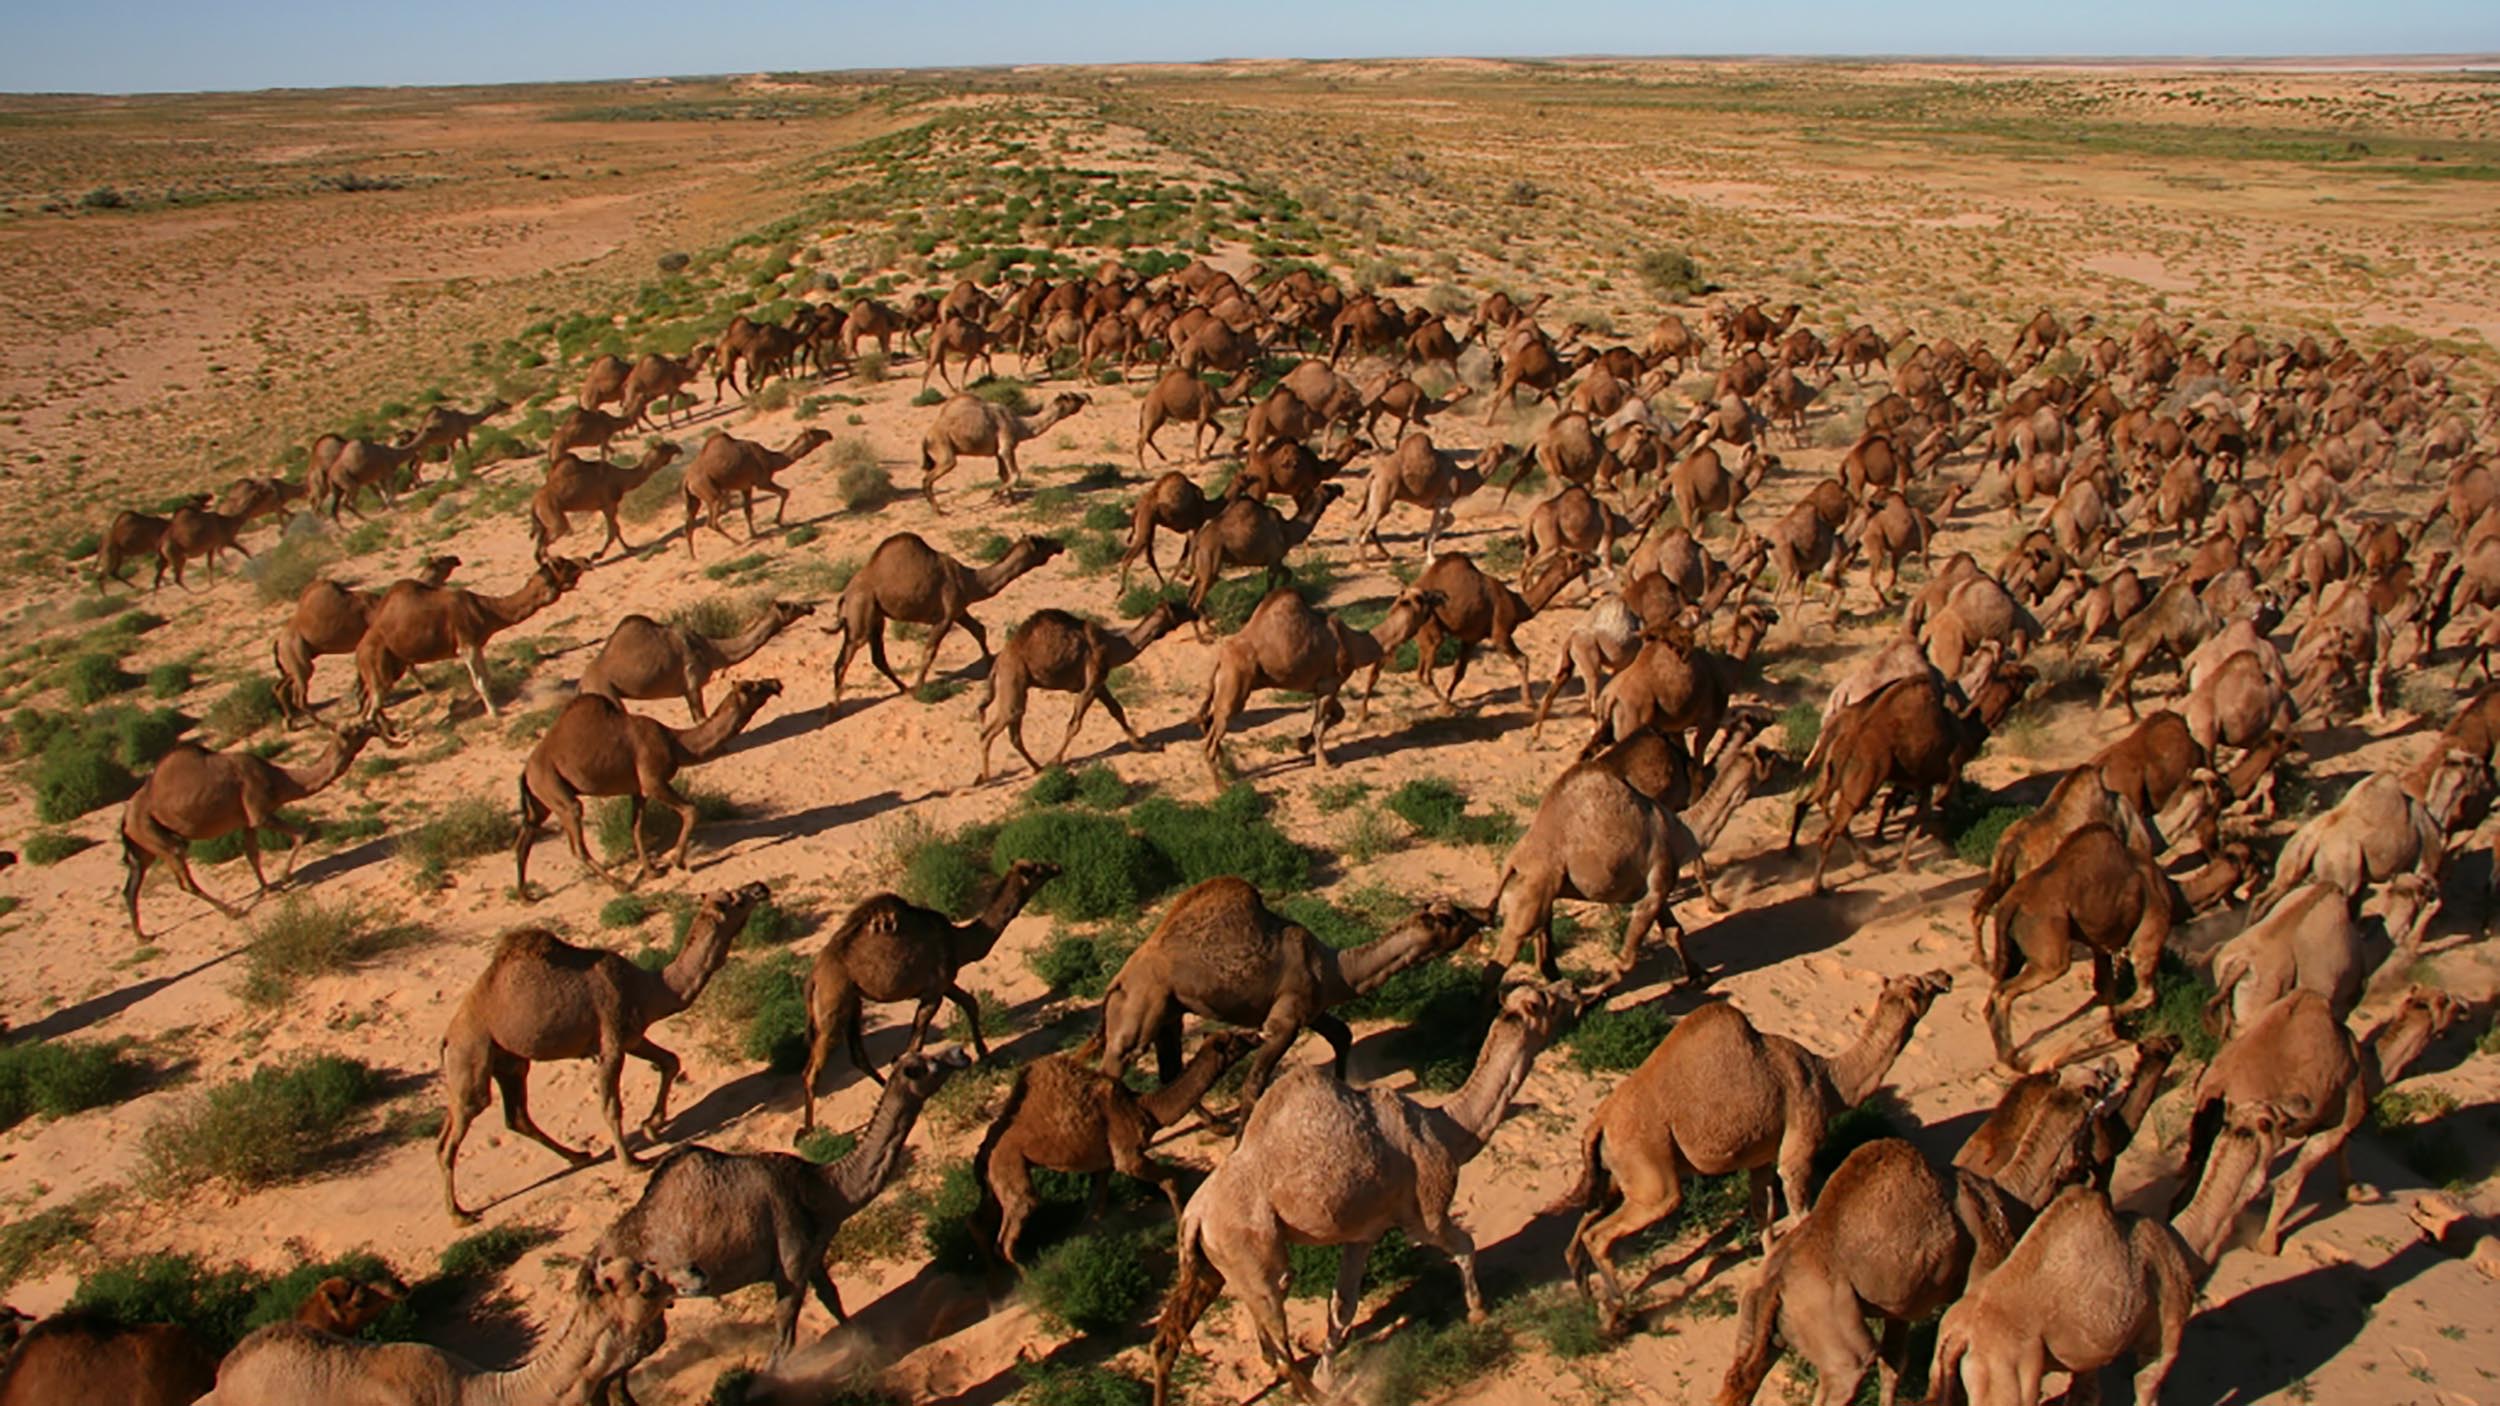 There are an estimated 300,000 feral camels in Australia, causing severe degradation of water sources and some vegetation types and damage to fences and other infrastructure. A recent collaborative program has substantially reduced their numbers across extensive areas.